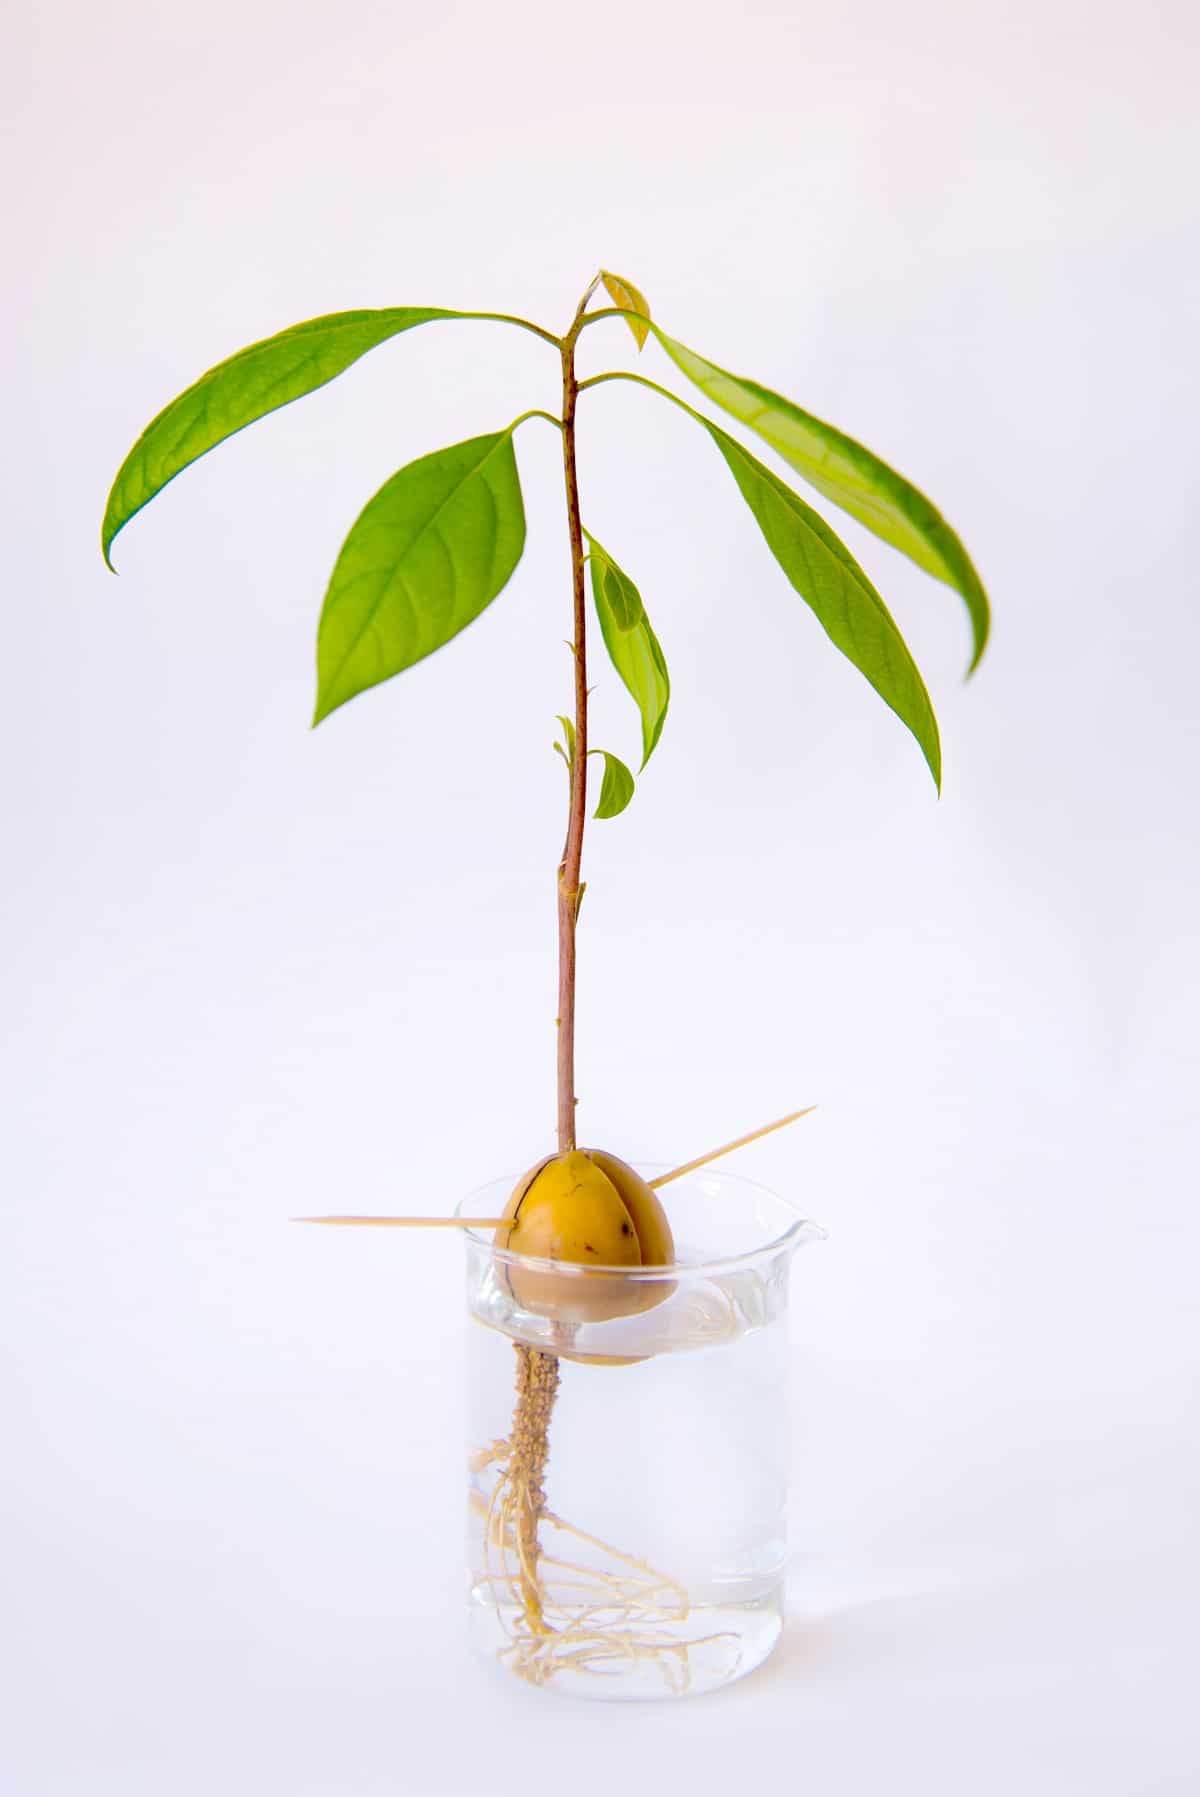 Avocado Growing in water with toothpicks